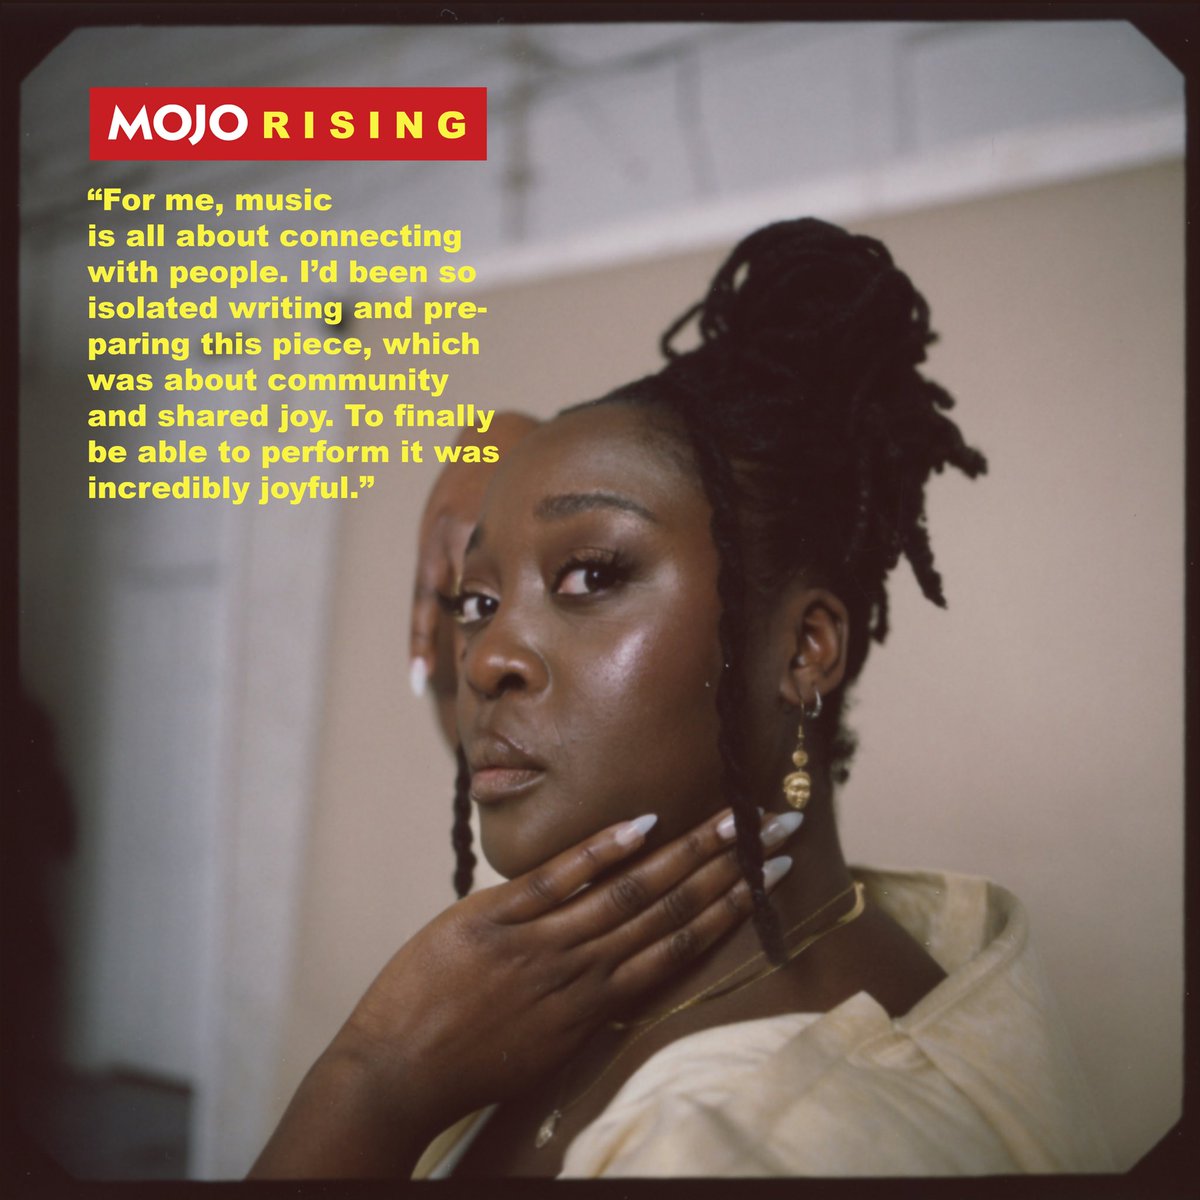 For their latest 𝗠𝗢𝗝𝗢 𝗥𝗜𝗦𝗜𝗡𝗚 feature, @MOJOmagazine takes a close look at @cassiekinoshi and talks to her about music and the making of her newest album, 𝘨𝘳𝘢𝘵𝘪𝘵𝘶𝘥𝘦. Pick up their newest issue to check out the full article!